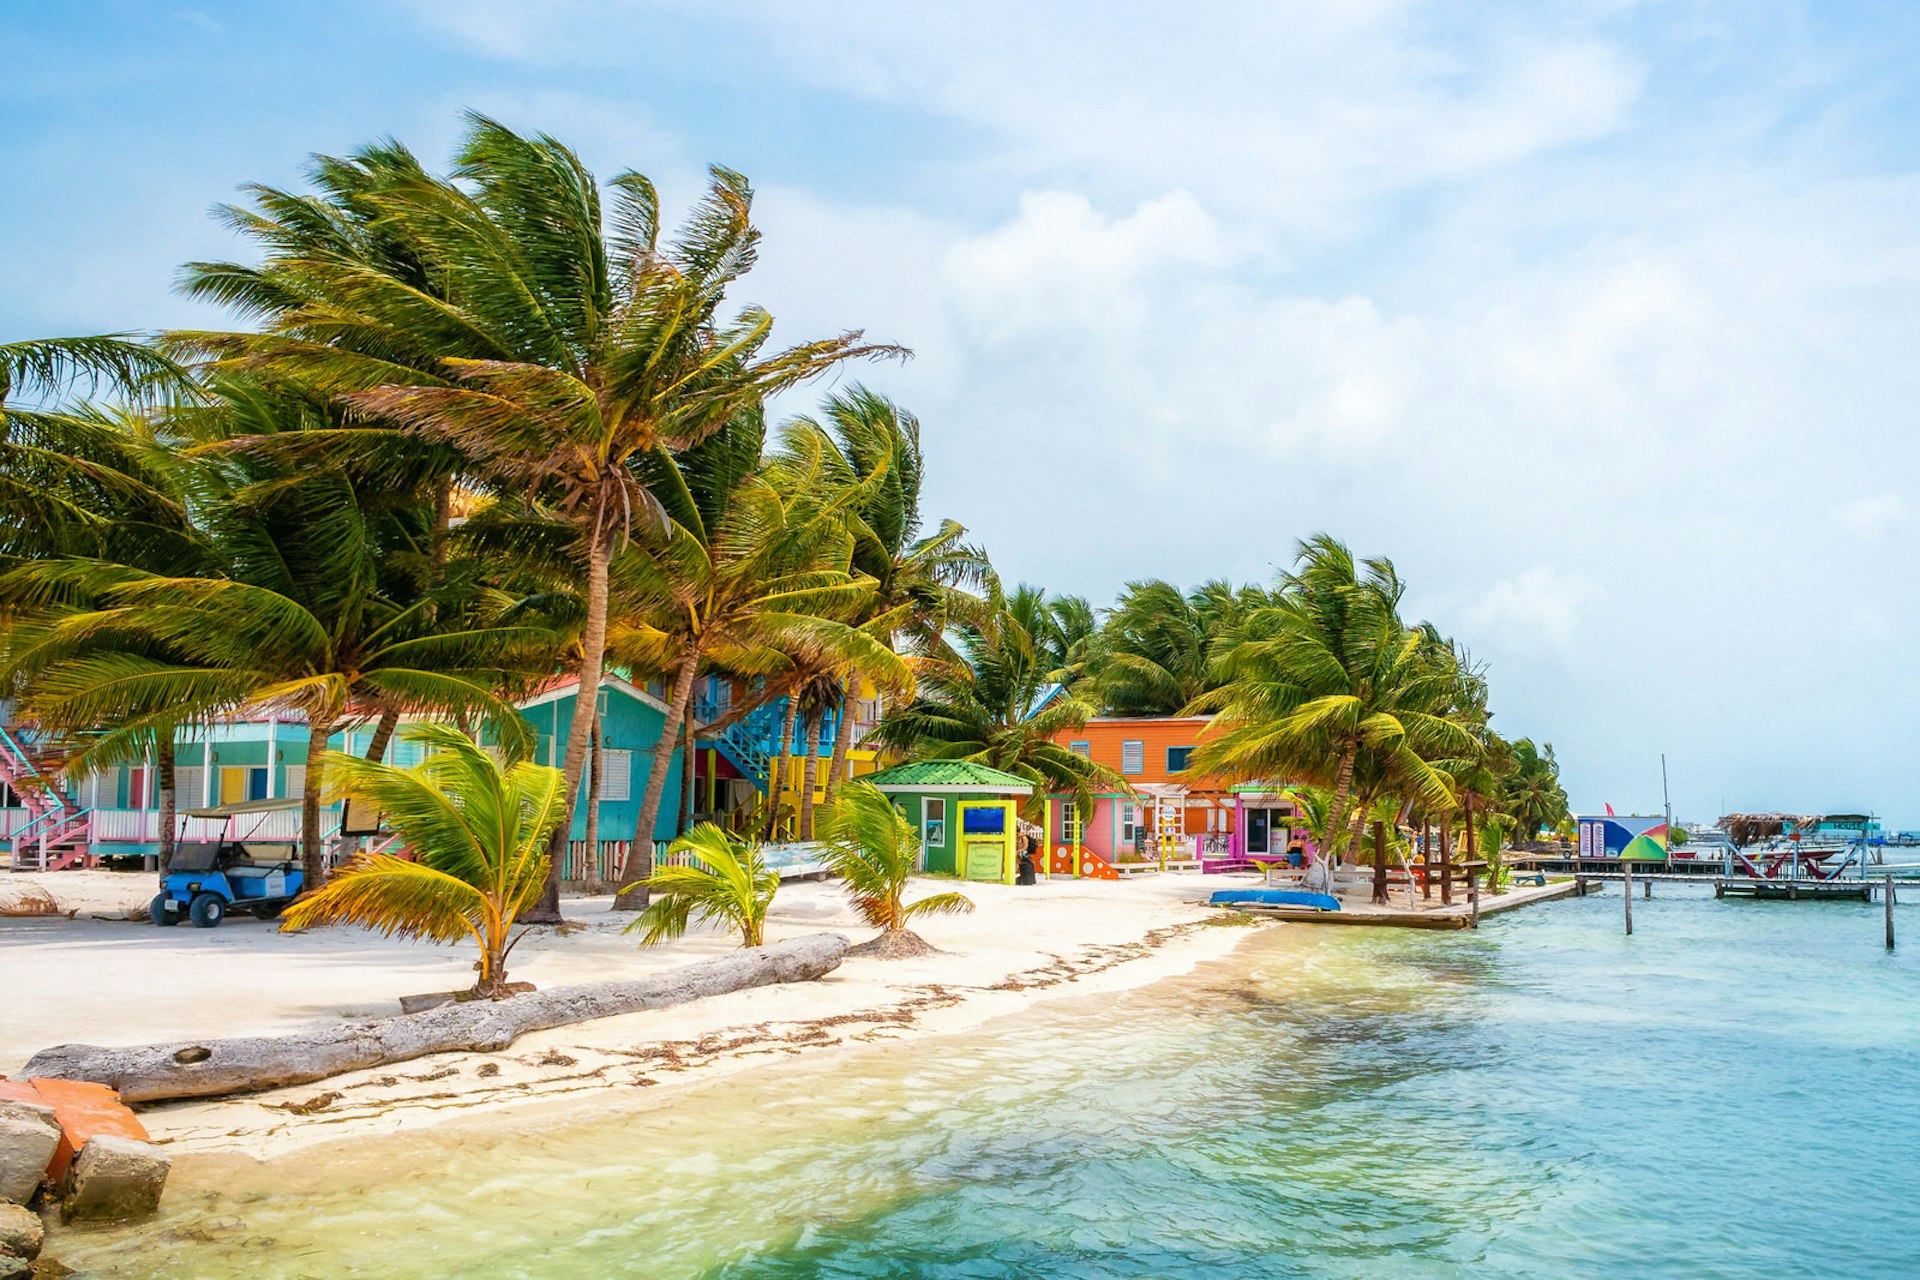 Palm trees and colorful houses line a beach in Caye Caulker, Belize